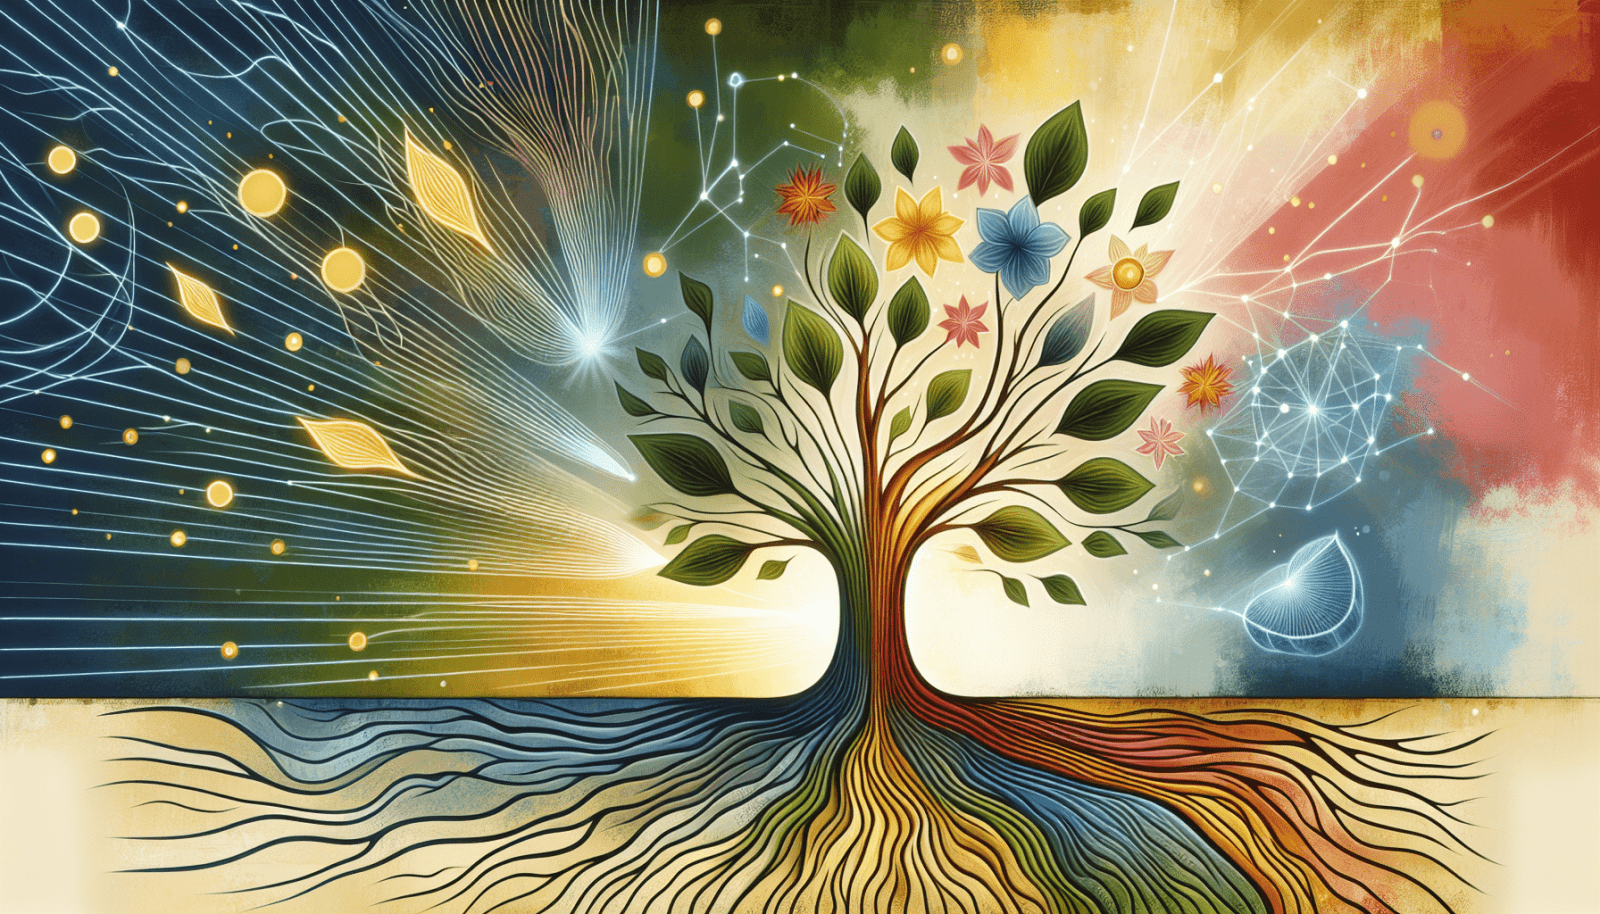 An artistic illustration of a vibrant tree with roots extending into the ground and branches splitting into various scientific and natural motifs, including flowers, leaves, celestial bodies, and abstract geometric shapes, set against a colorful background that transitions from dark to light, symbolizing the intersection of nature and science.